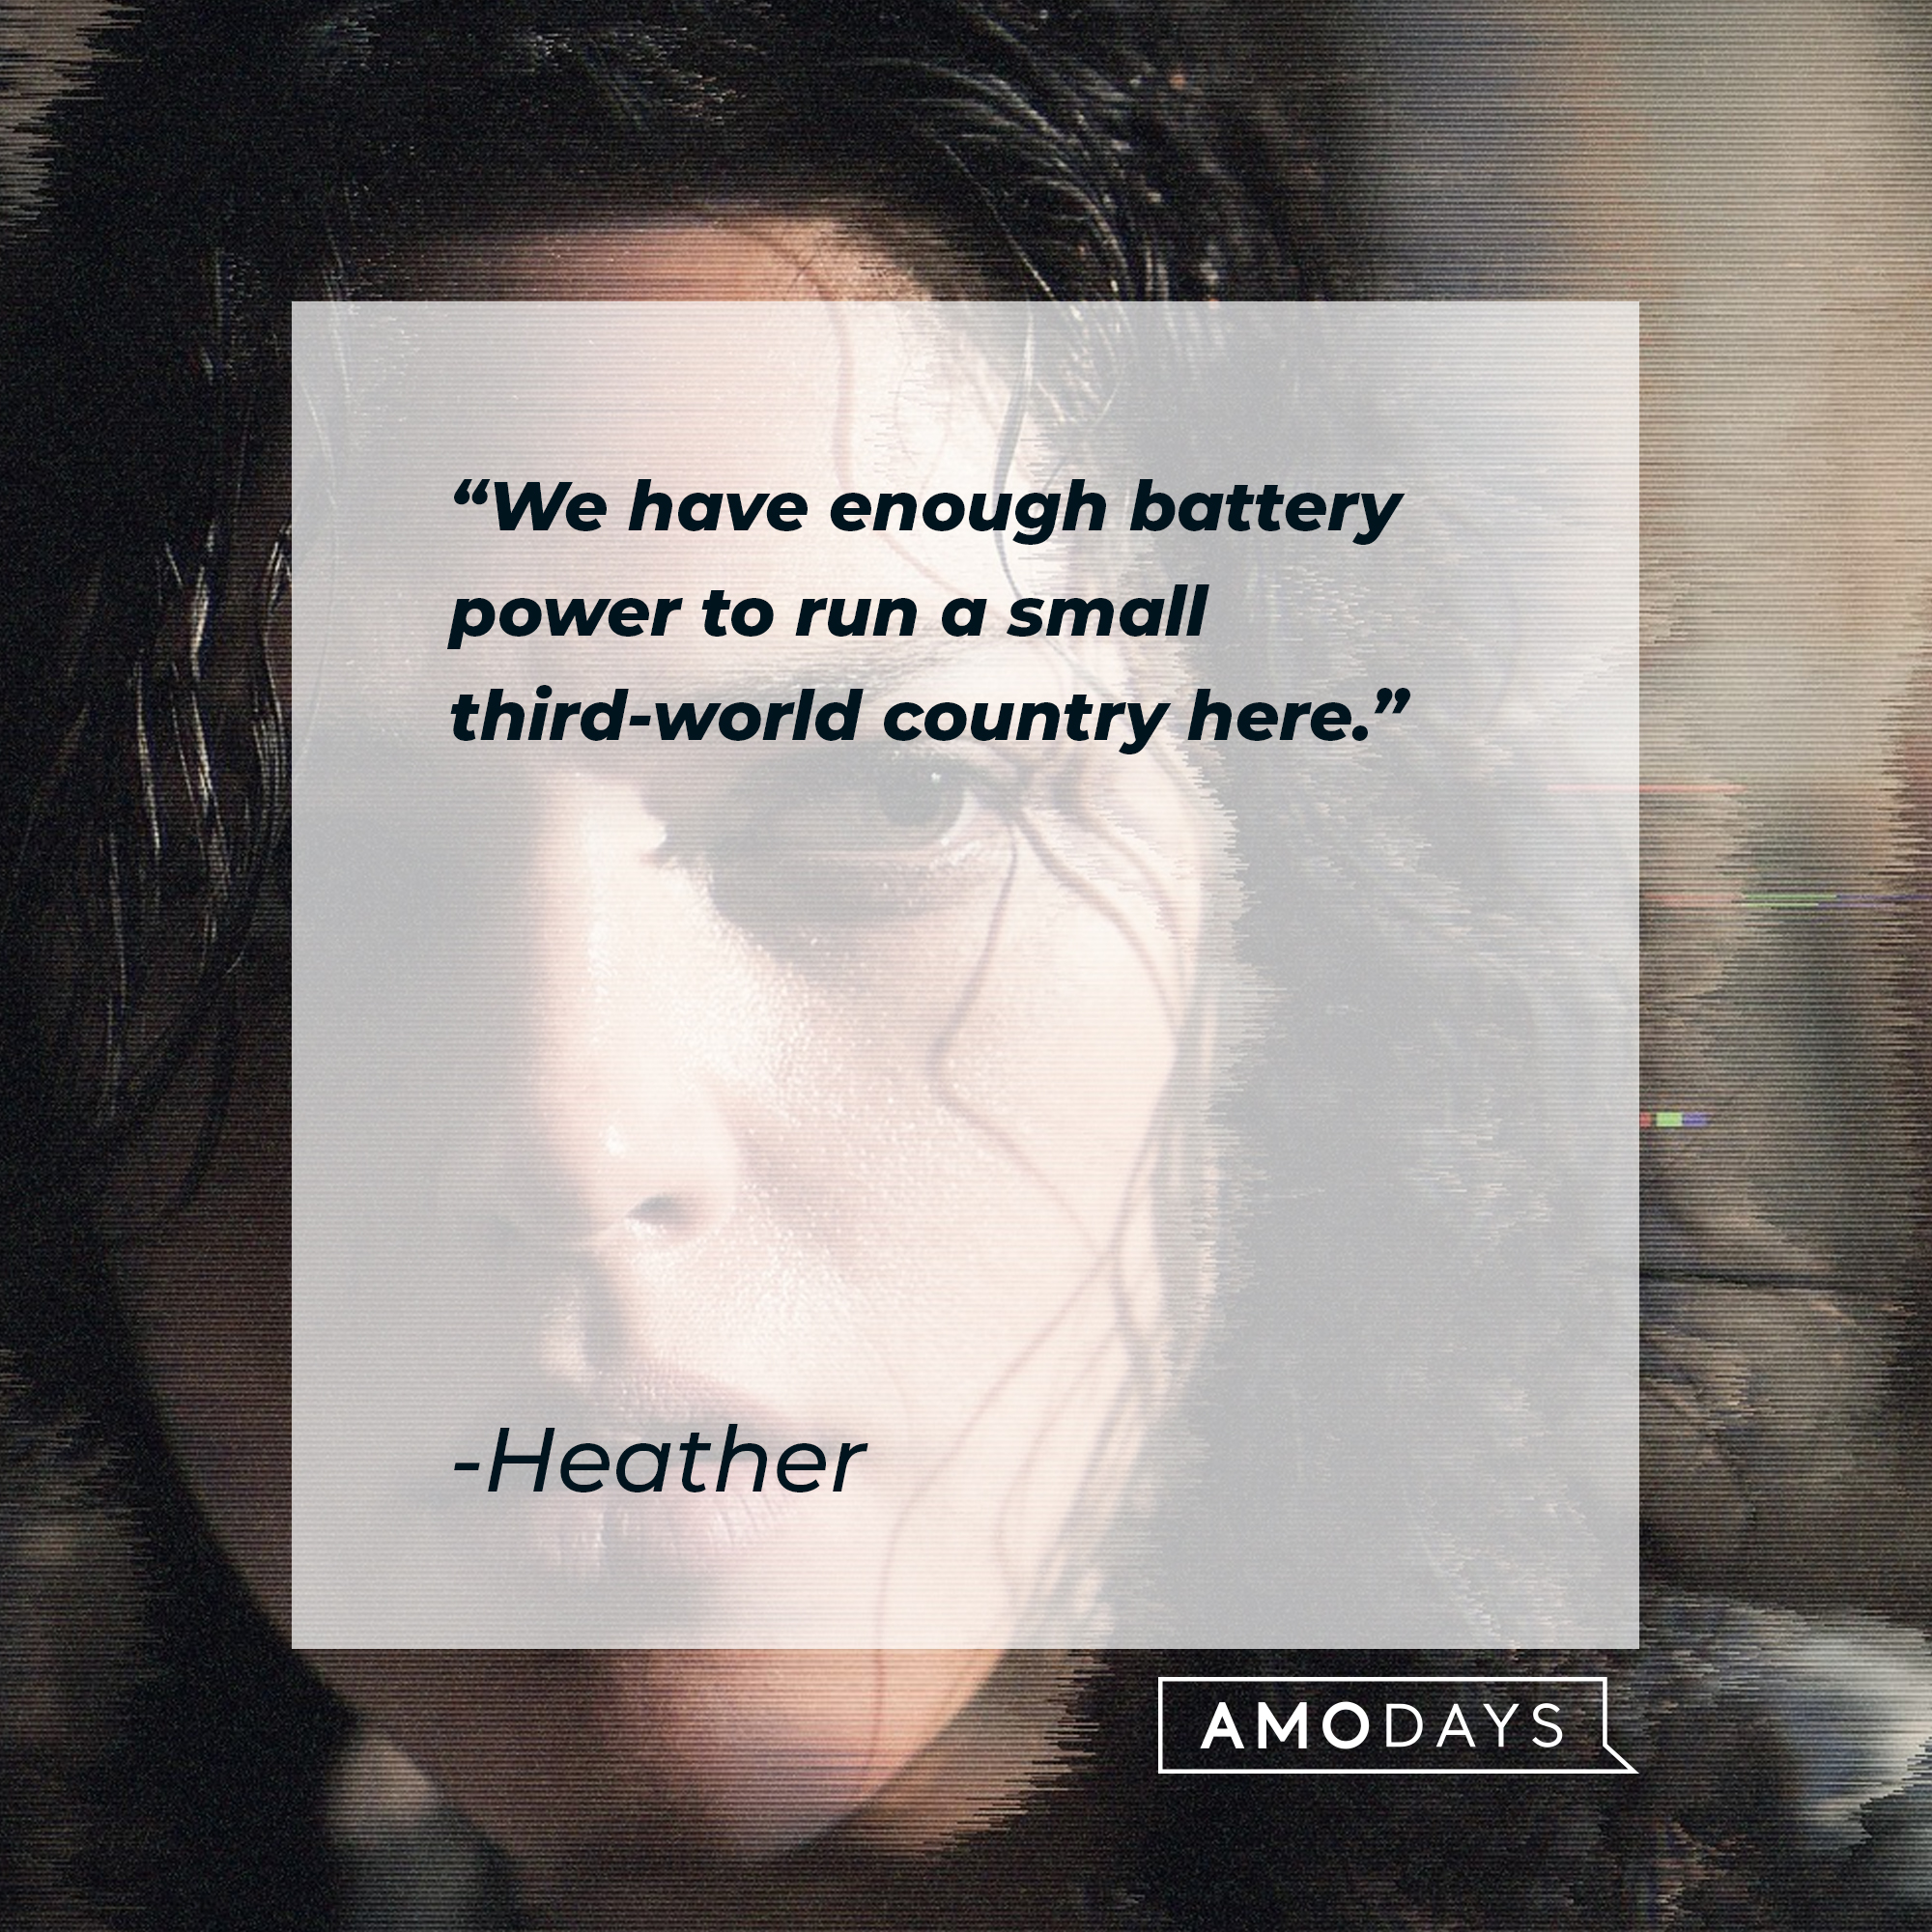 Heather's quote: “We have enough battery power to run a small third-world country here.” | Source: facebook.com/blairwitchmovie